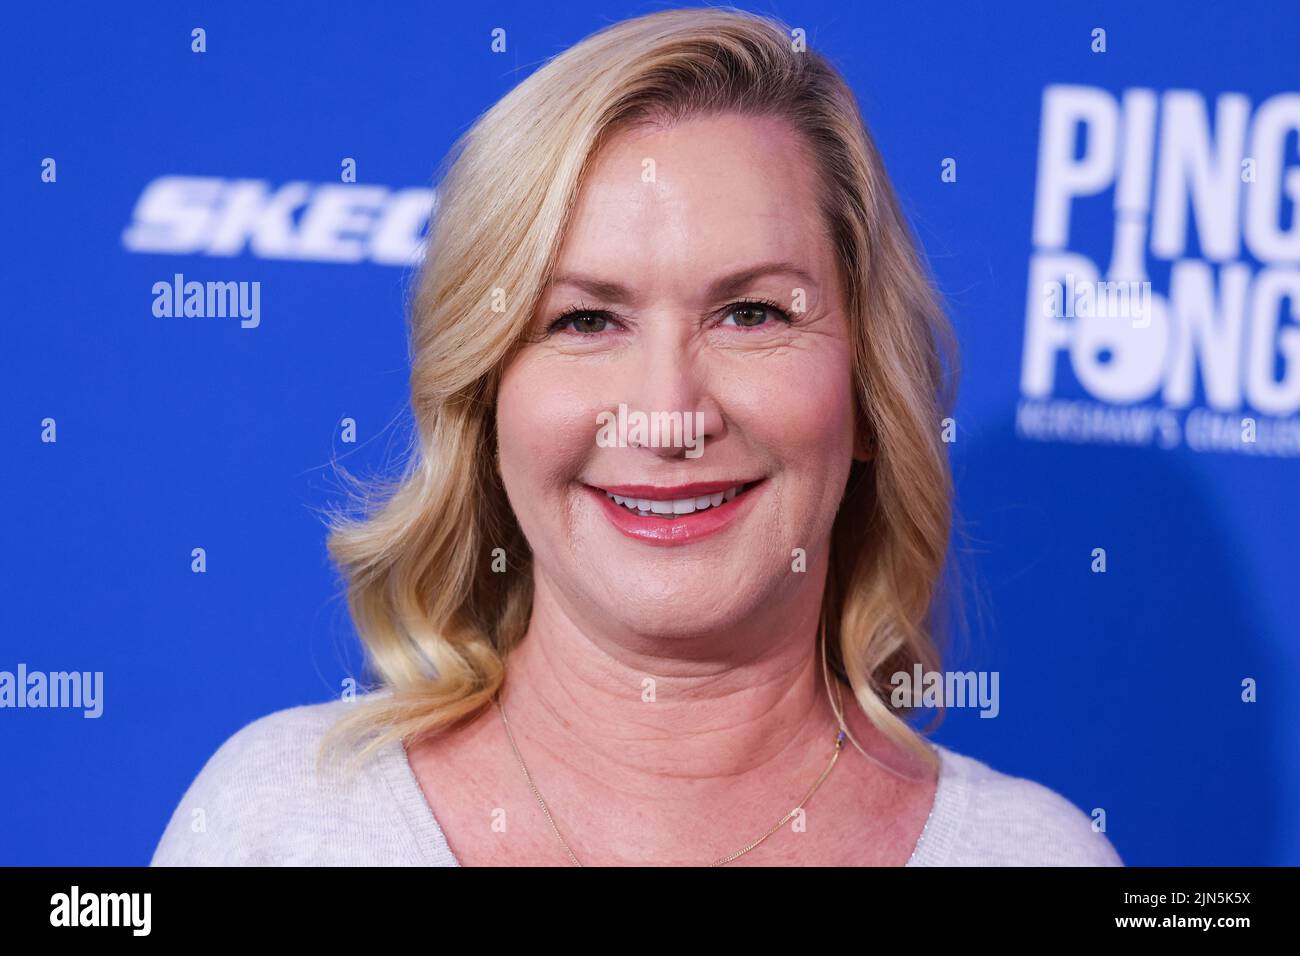 ELYSIAN PARK, LOS ANGELES, CALIFORNIA, USA - AUGUST 08: American actress Angela Kinsey arrives at Kershaw's Challenge Ping Pong 4 Purpose 2022 held at Dodger Stadium on August 8, 2022 in Elysian Park, Los Angeles, California, United States. (Photo by Xavier Collin/Image Press Agency) Stock Photo